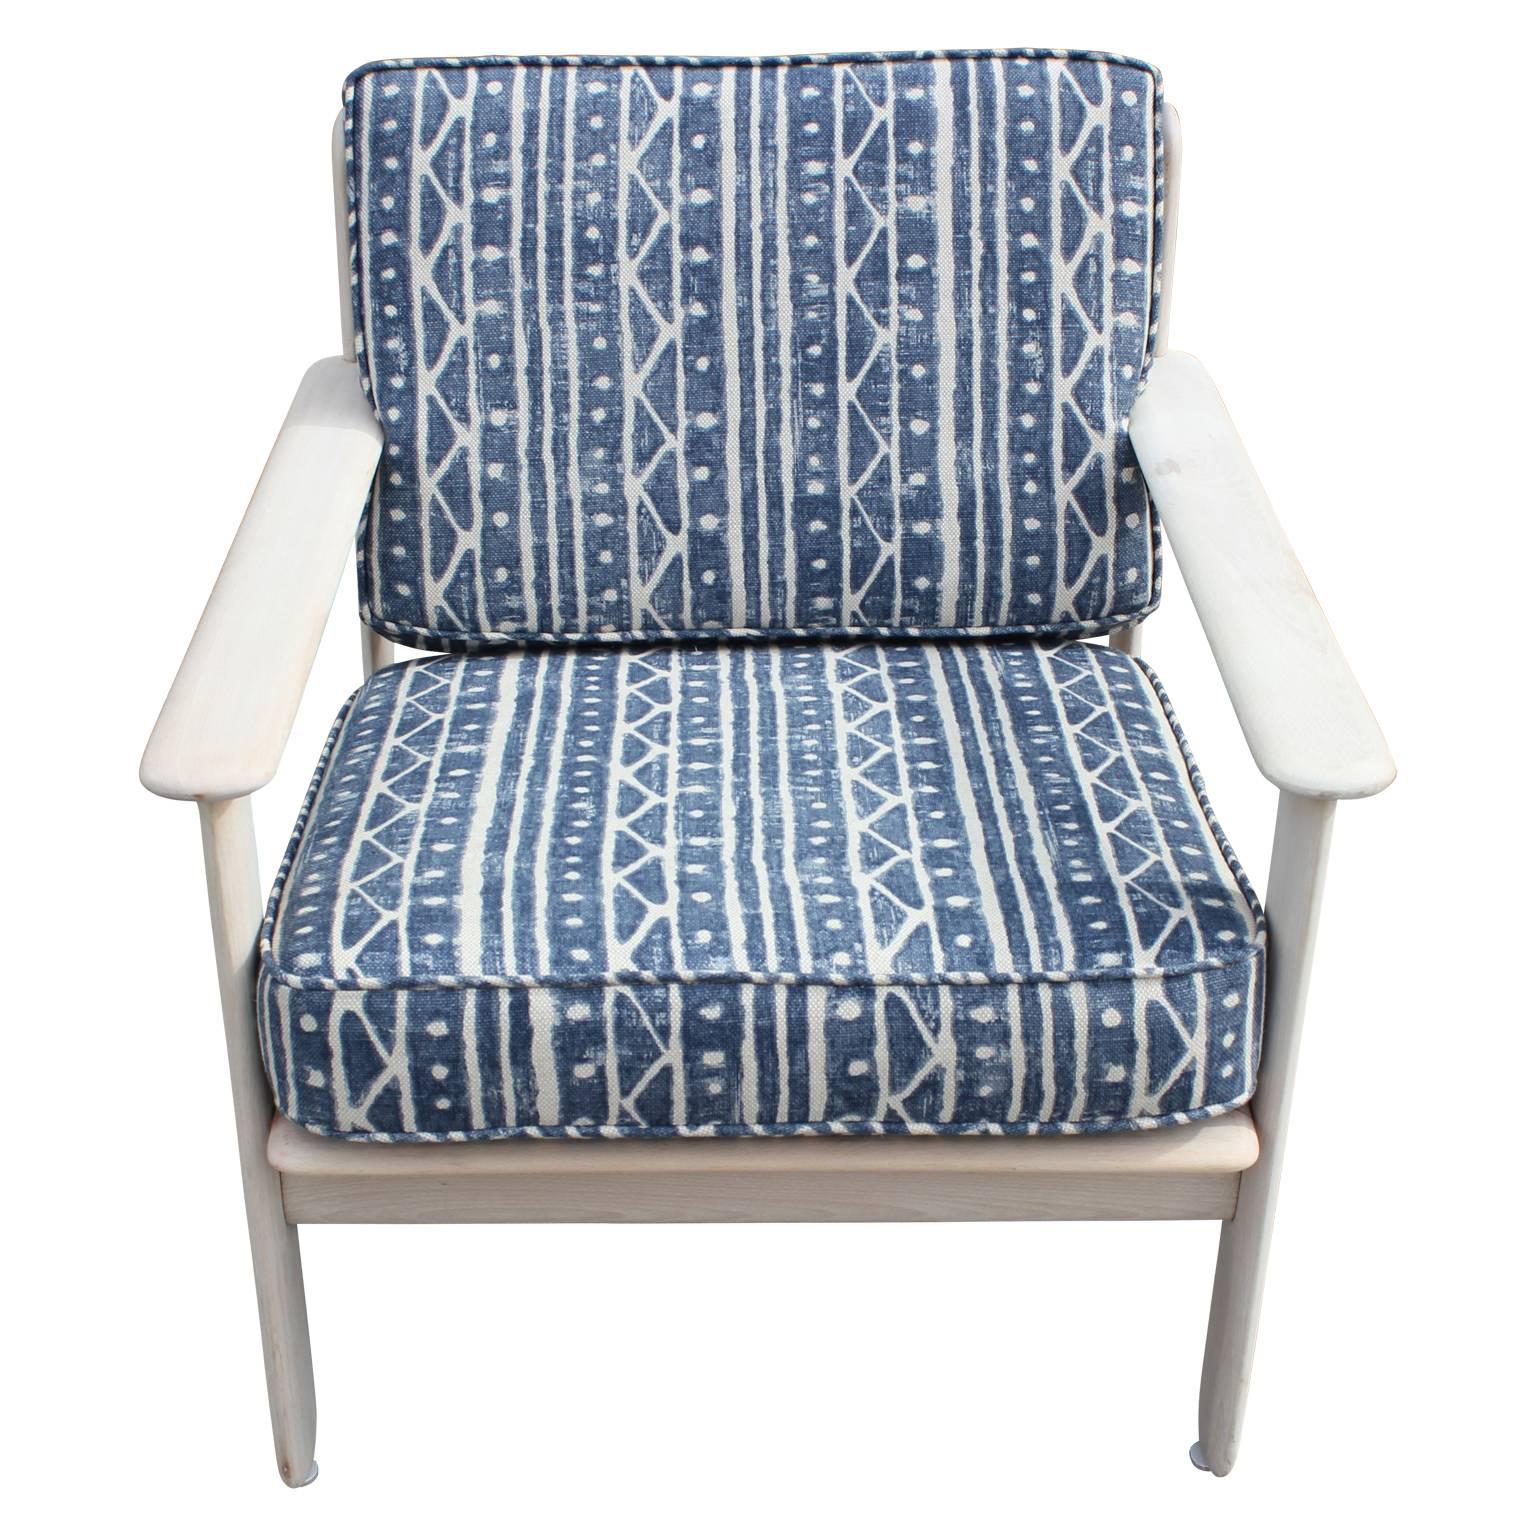 Mid-20th Century Pair of Modern Bleached Wood Italian Lounge Chairs in Indigo Blue & White Linen